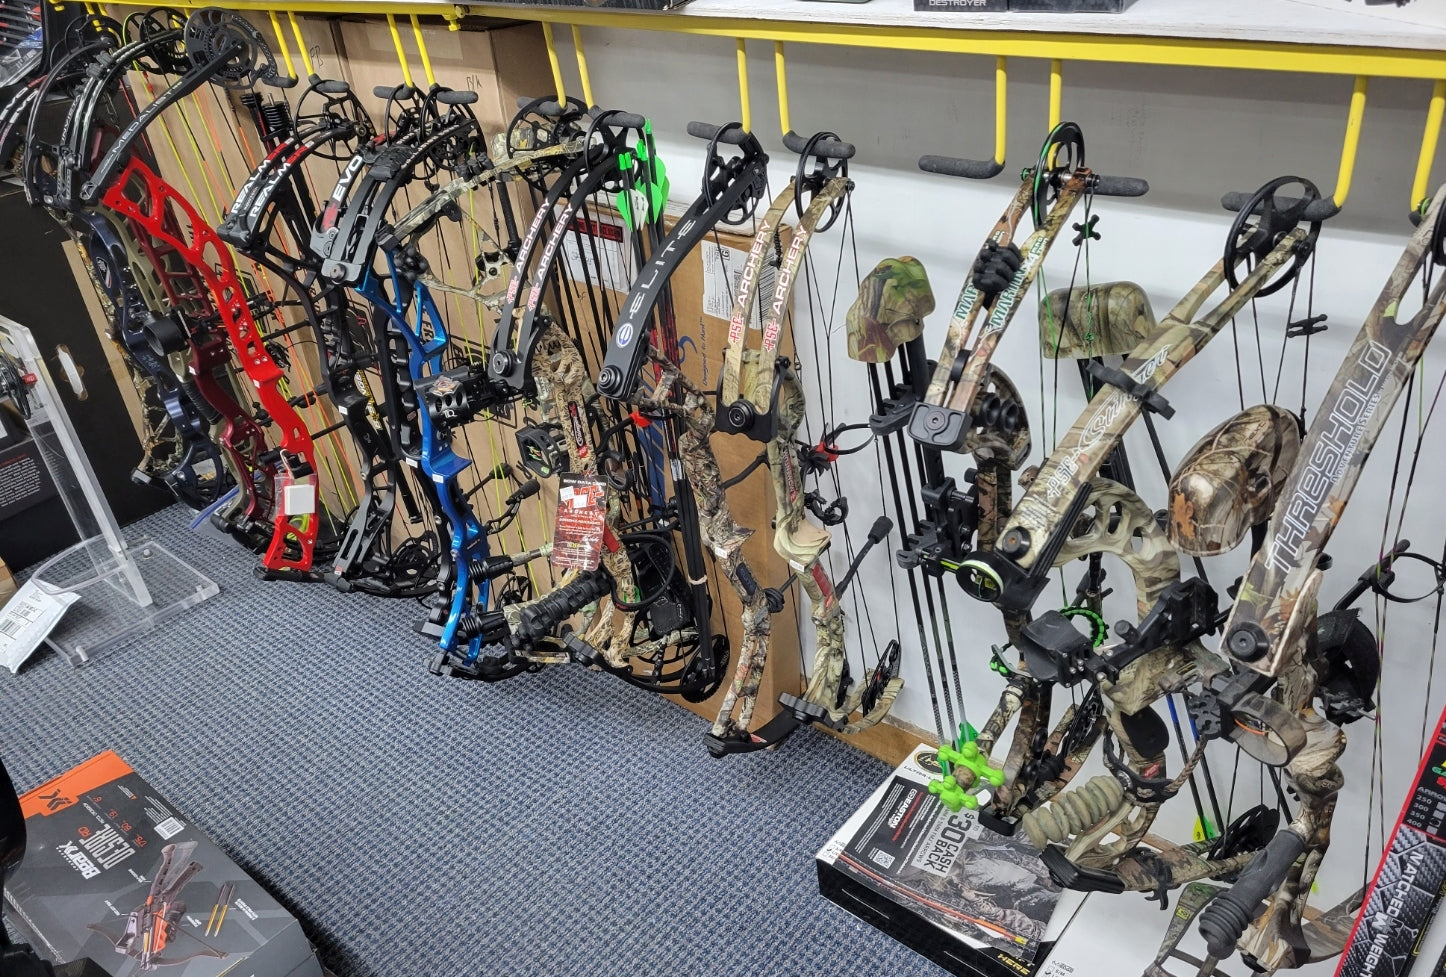 Left Hand Archery Bows for sale, Shop with Afterpay